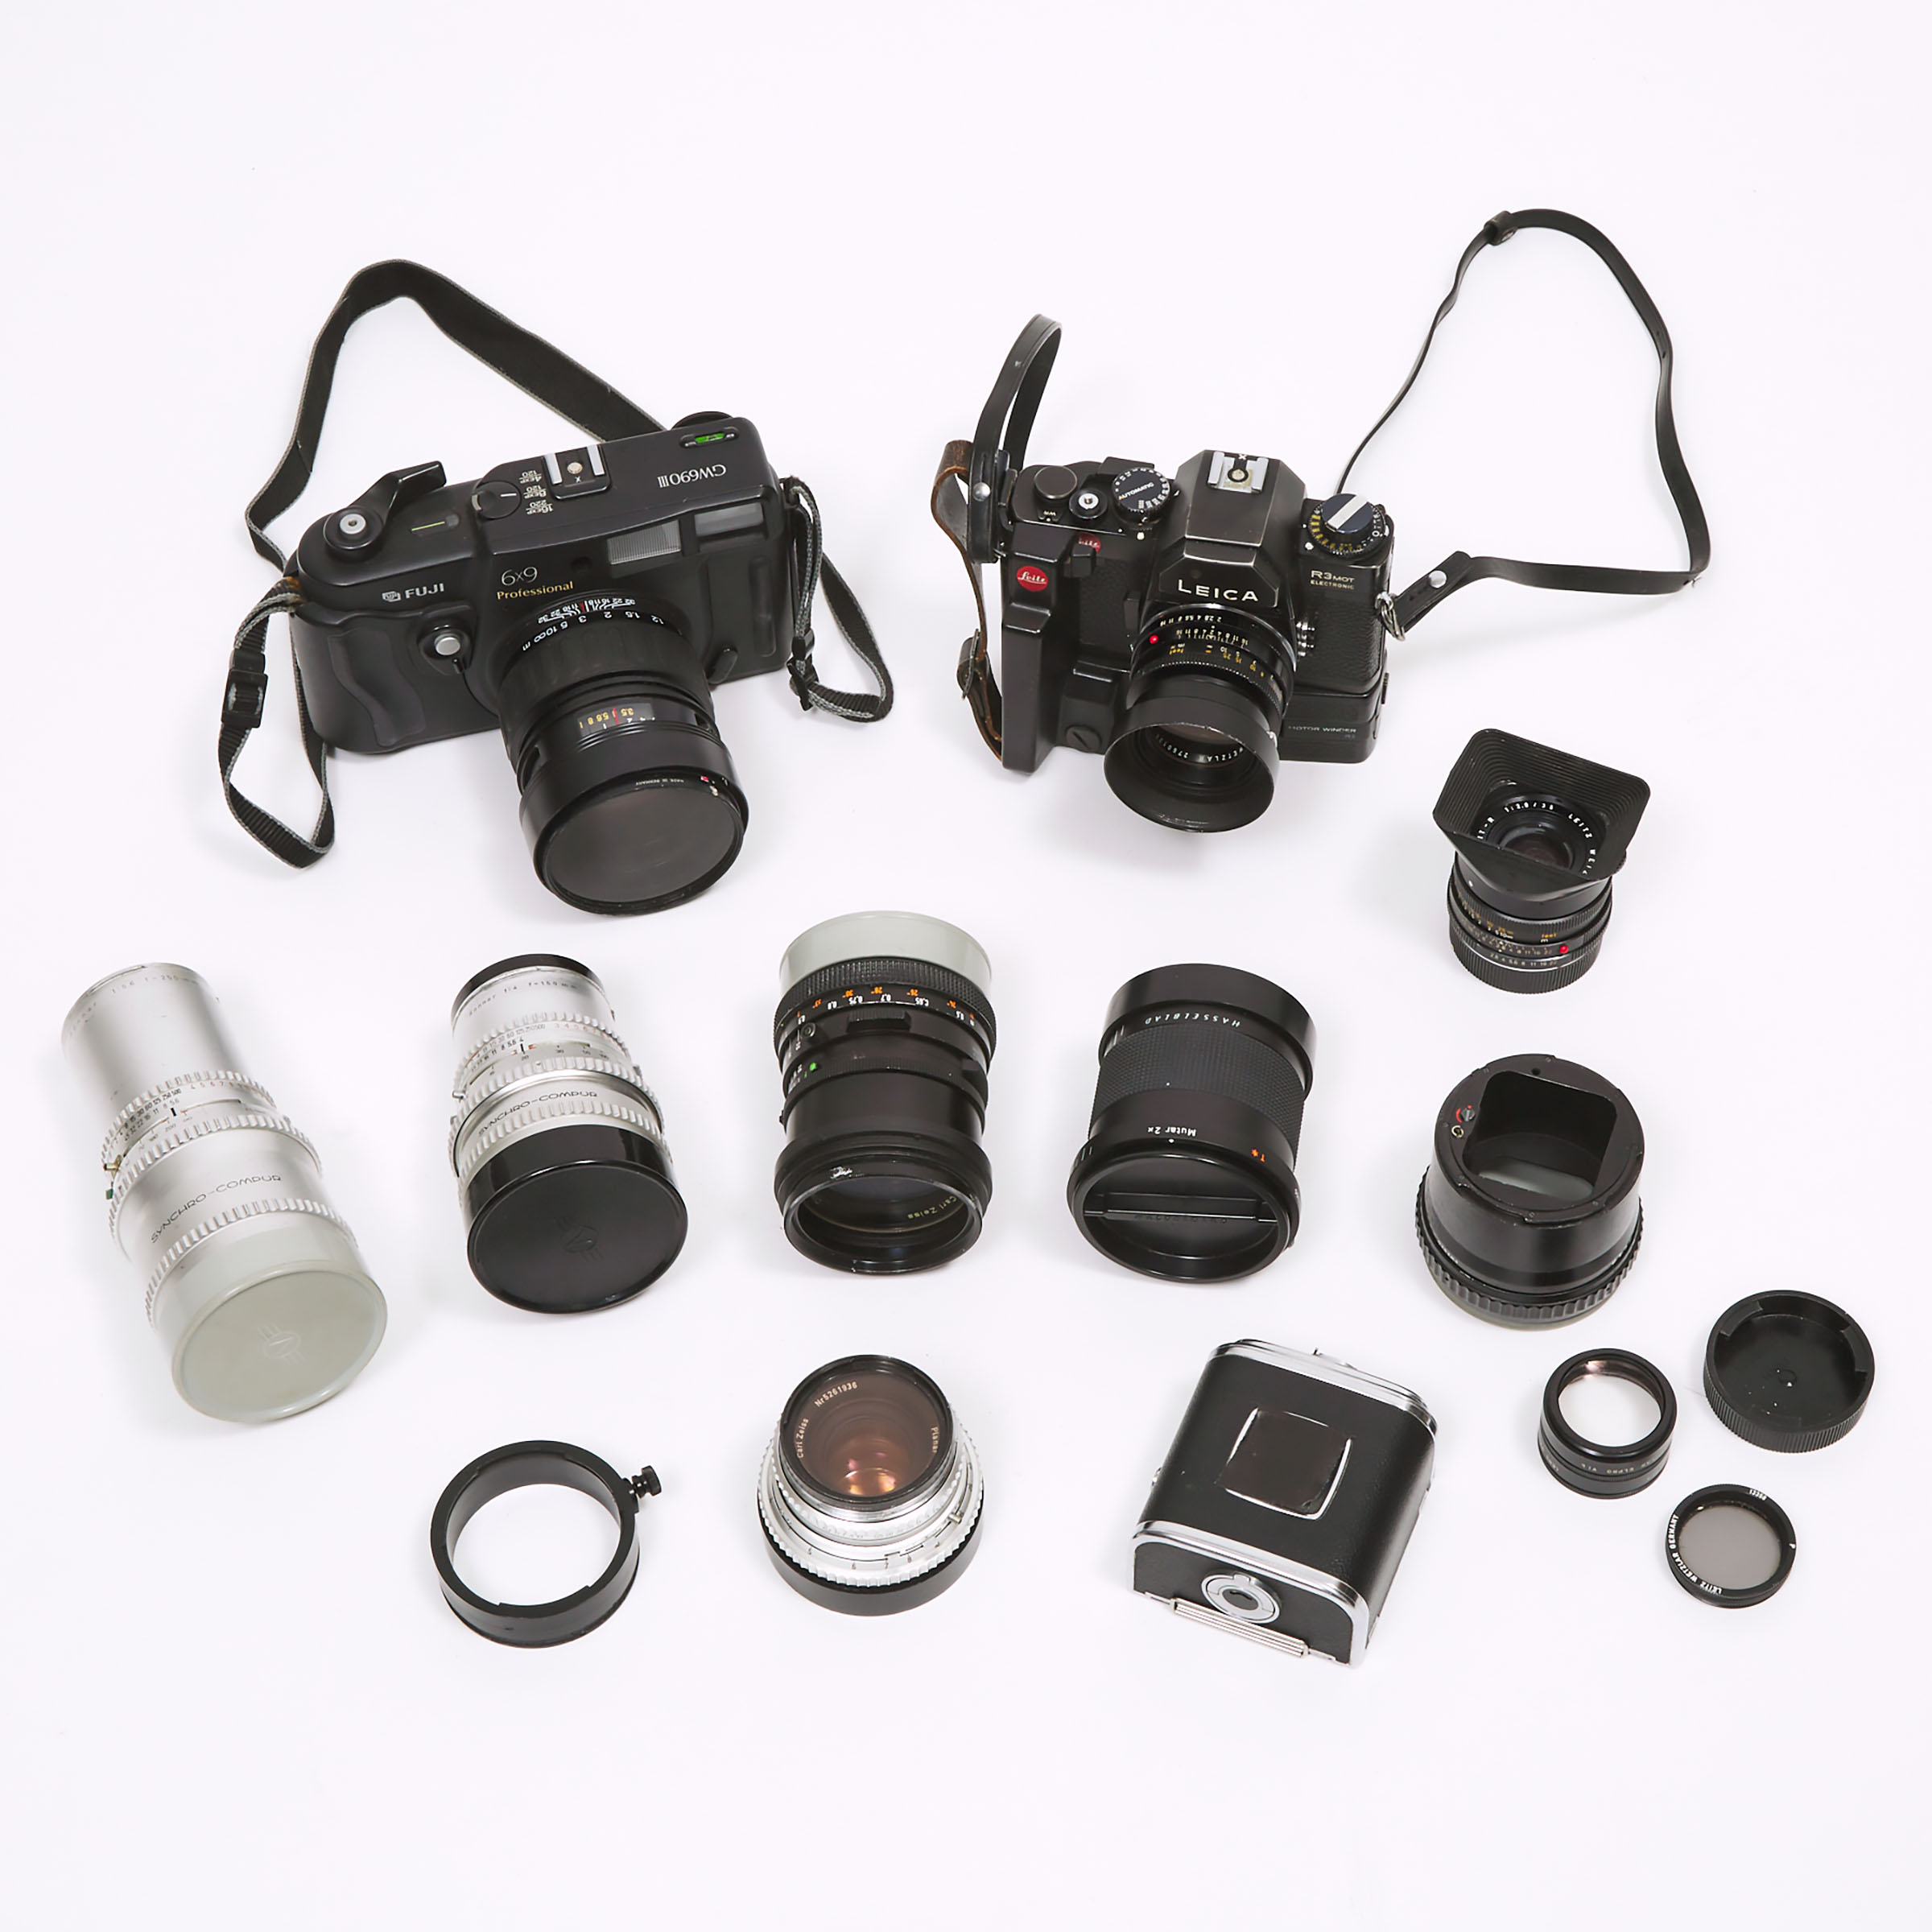 Miscellaneous Group of Camera Equipment, mid-late 20th century